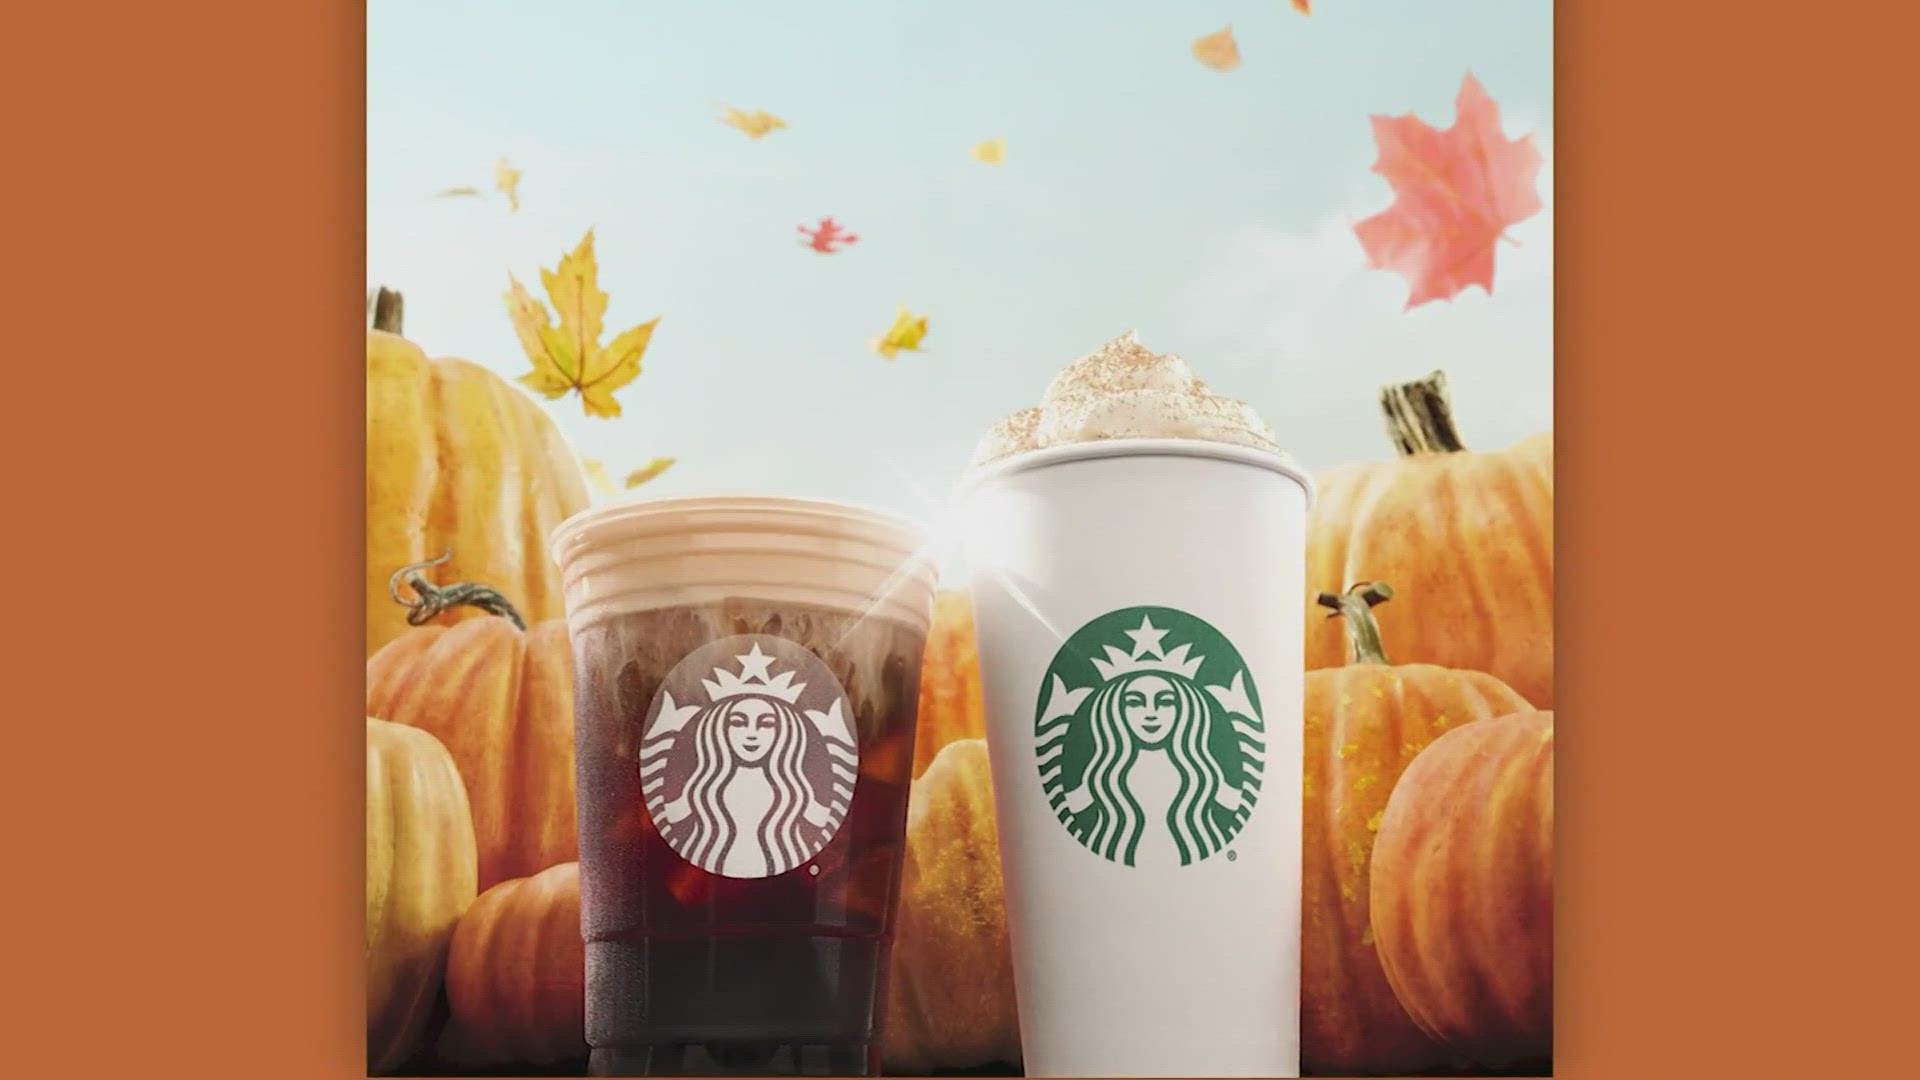 New Starbucks merchandise to inspire all the fall feels